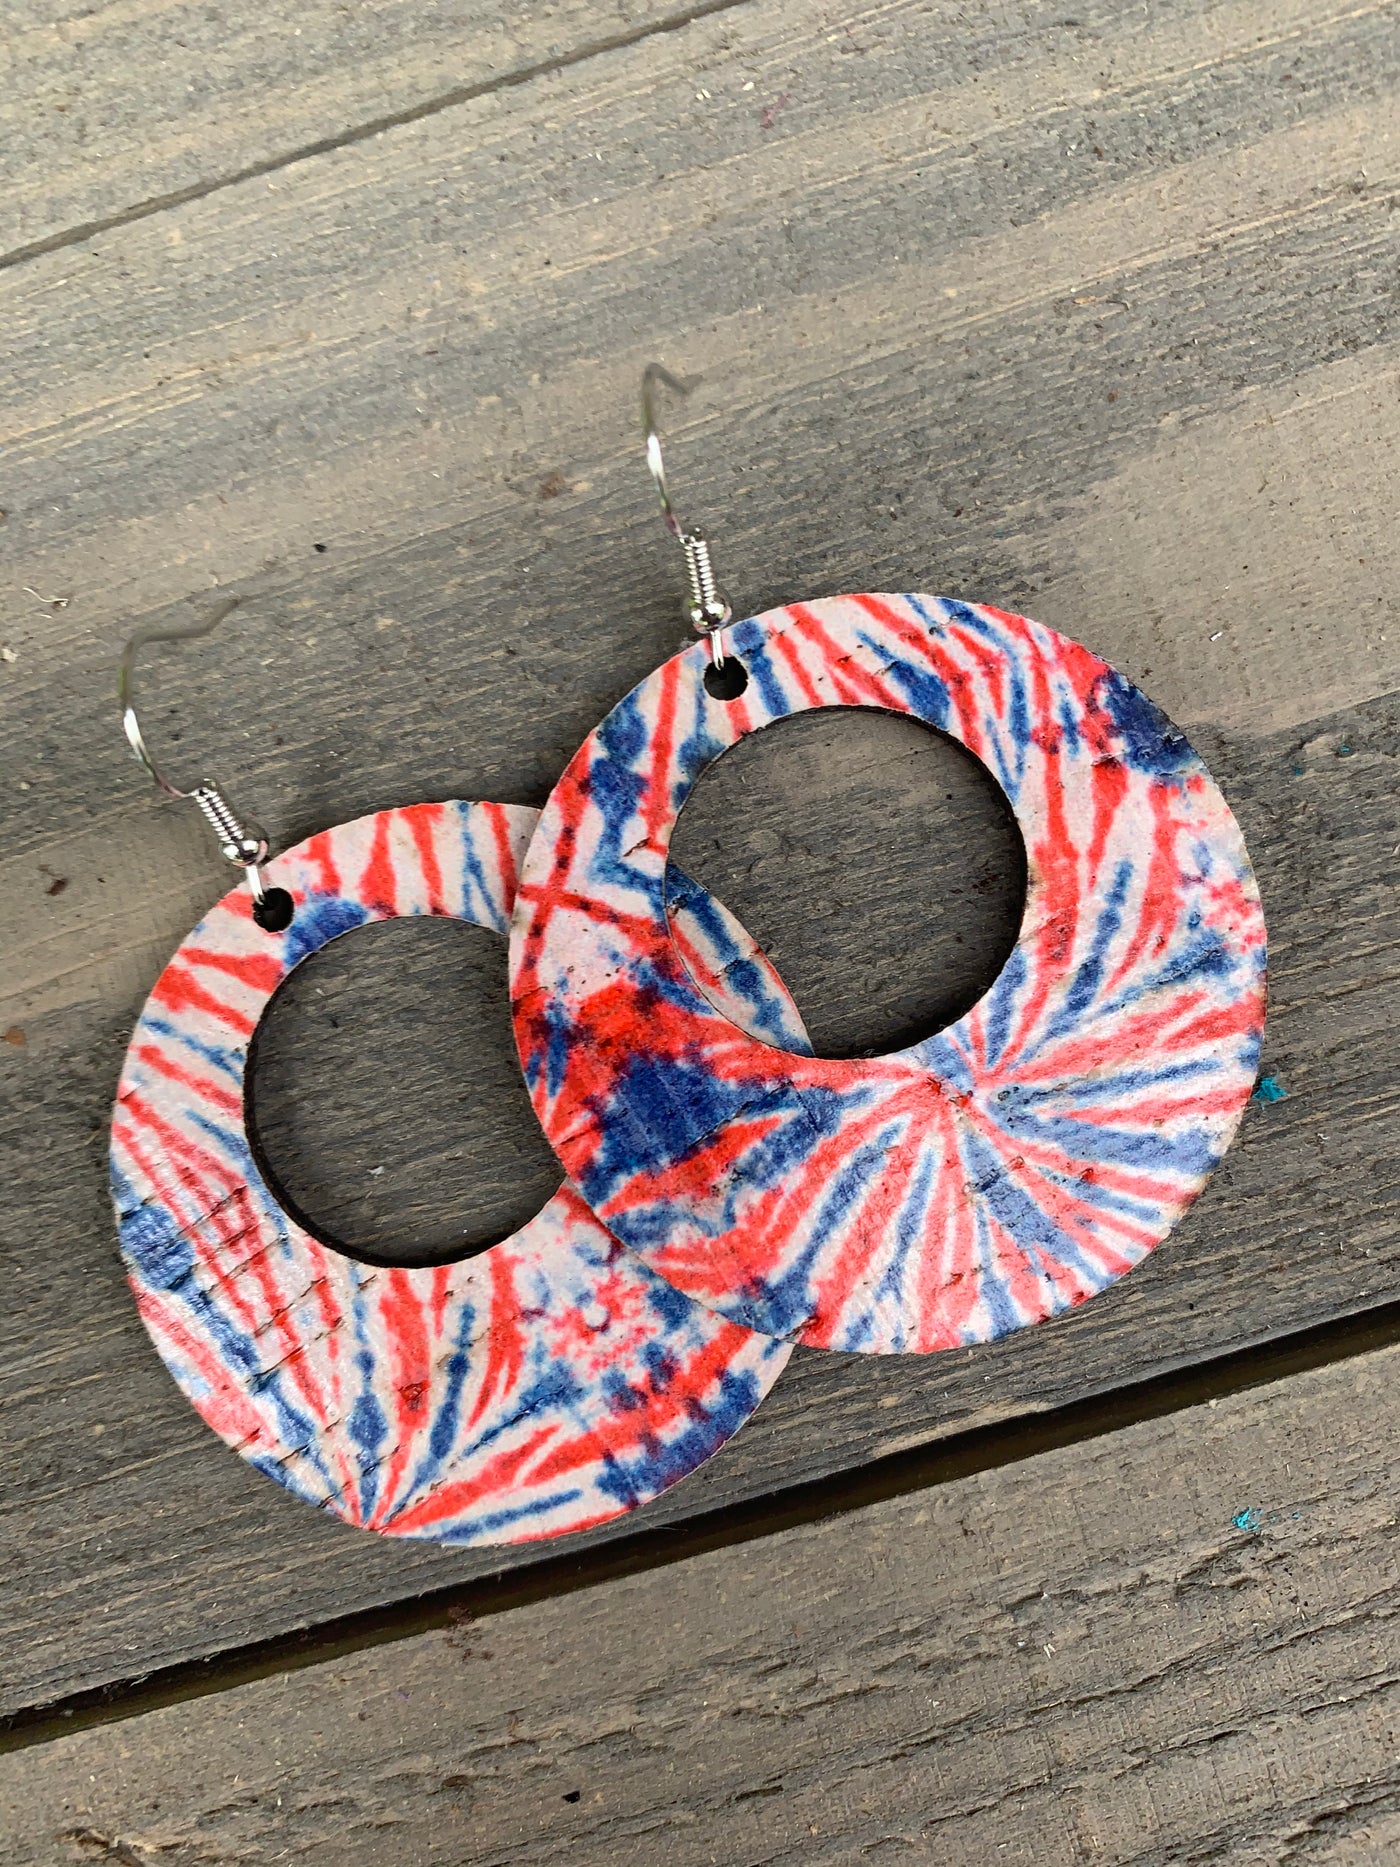 Red White and Blue Tie Dye Cork Hoop Earring - Jill's Jewels | Unique, Handcrafted, Trendy, And Fun Jewelry